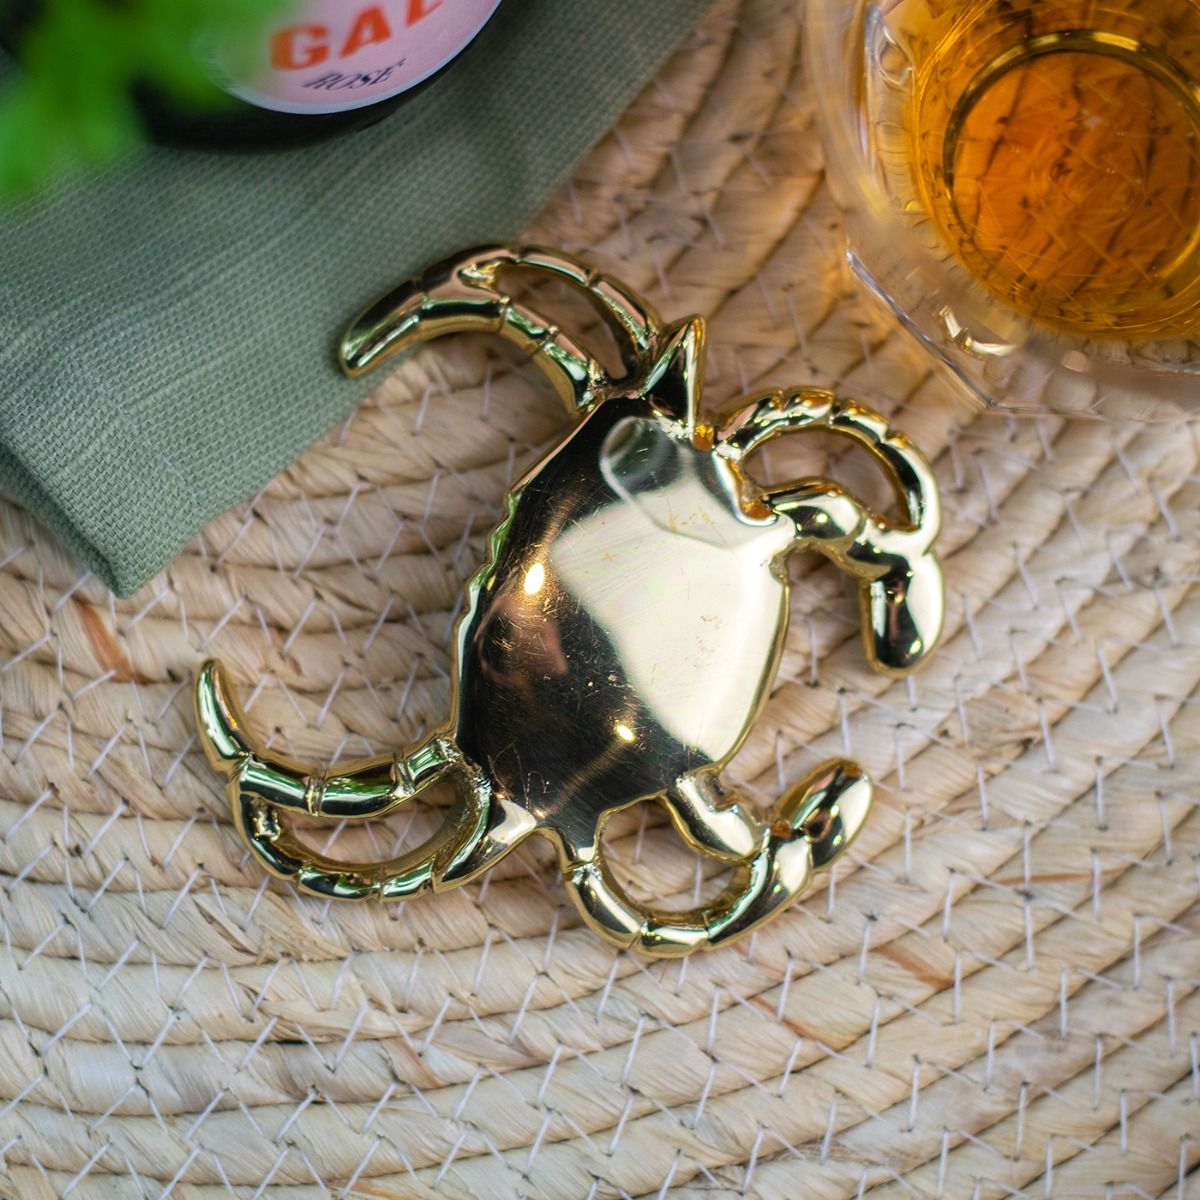 Culinary Concepts London. Crab Bottle Opener *NEW* - TheArtistsQuarter